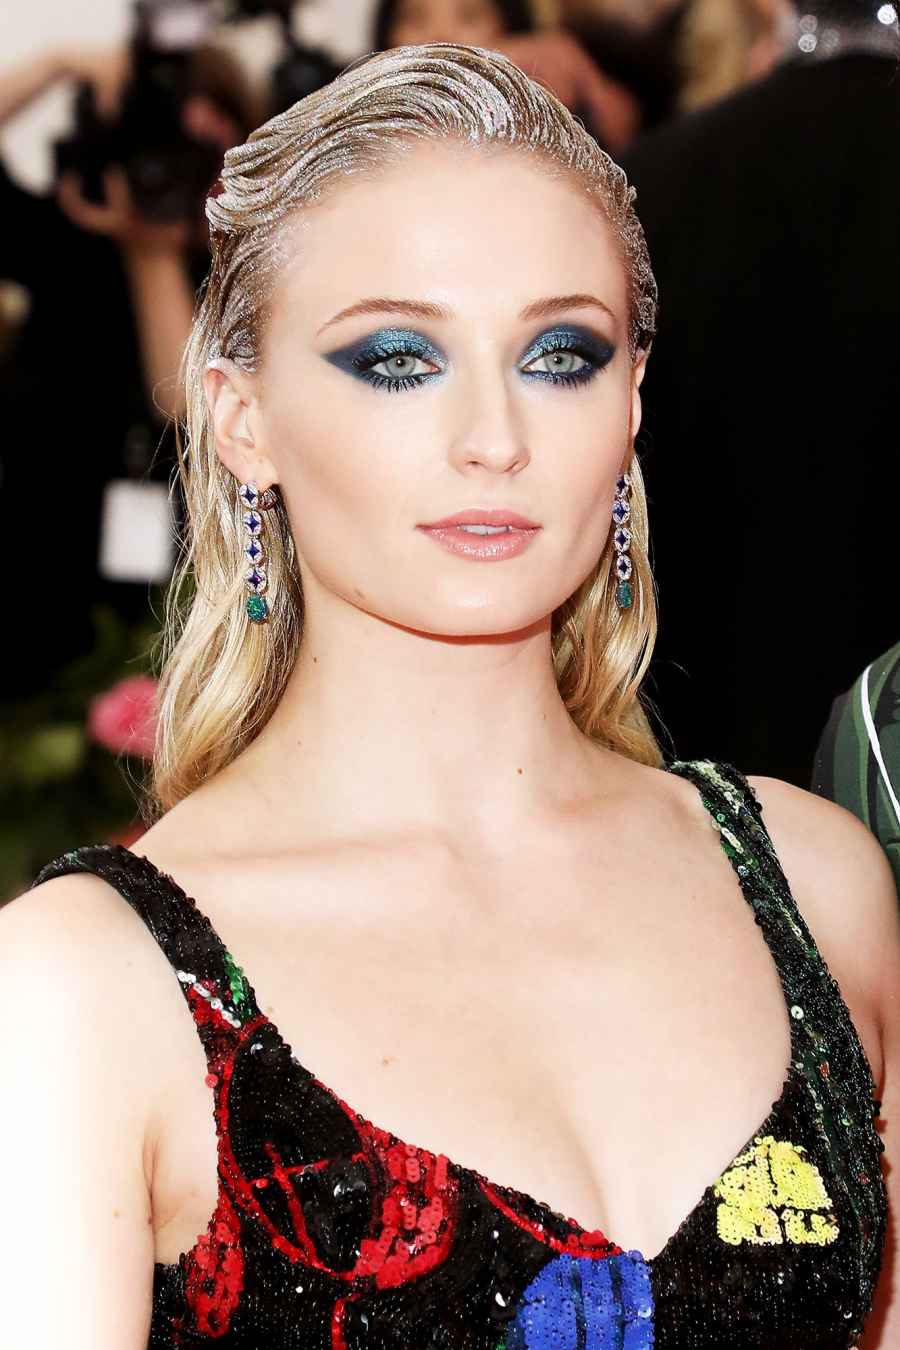 Sophie Turner Met Gala 2019: See the Wildest Hair and Makeup on the Red Carpet